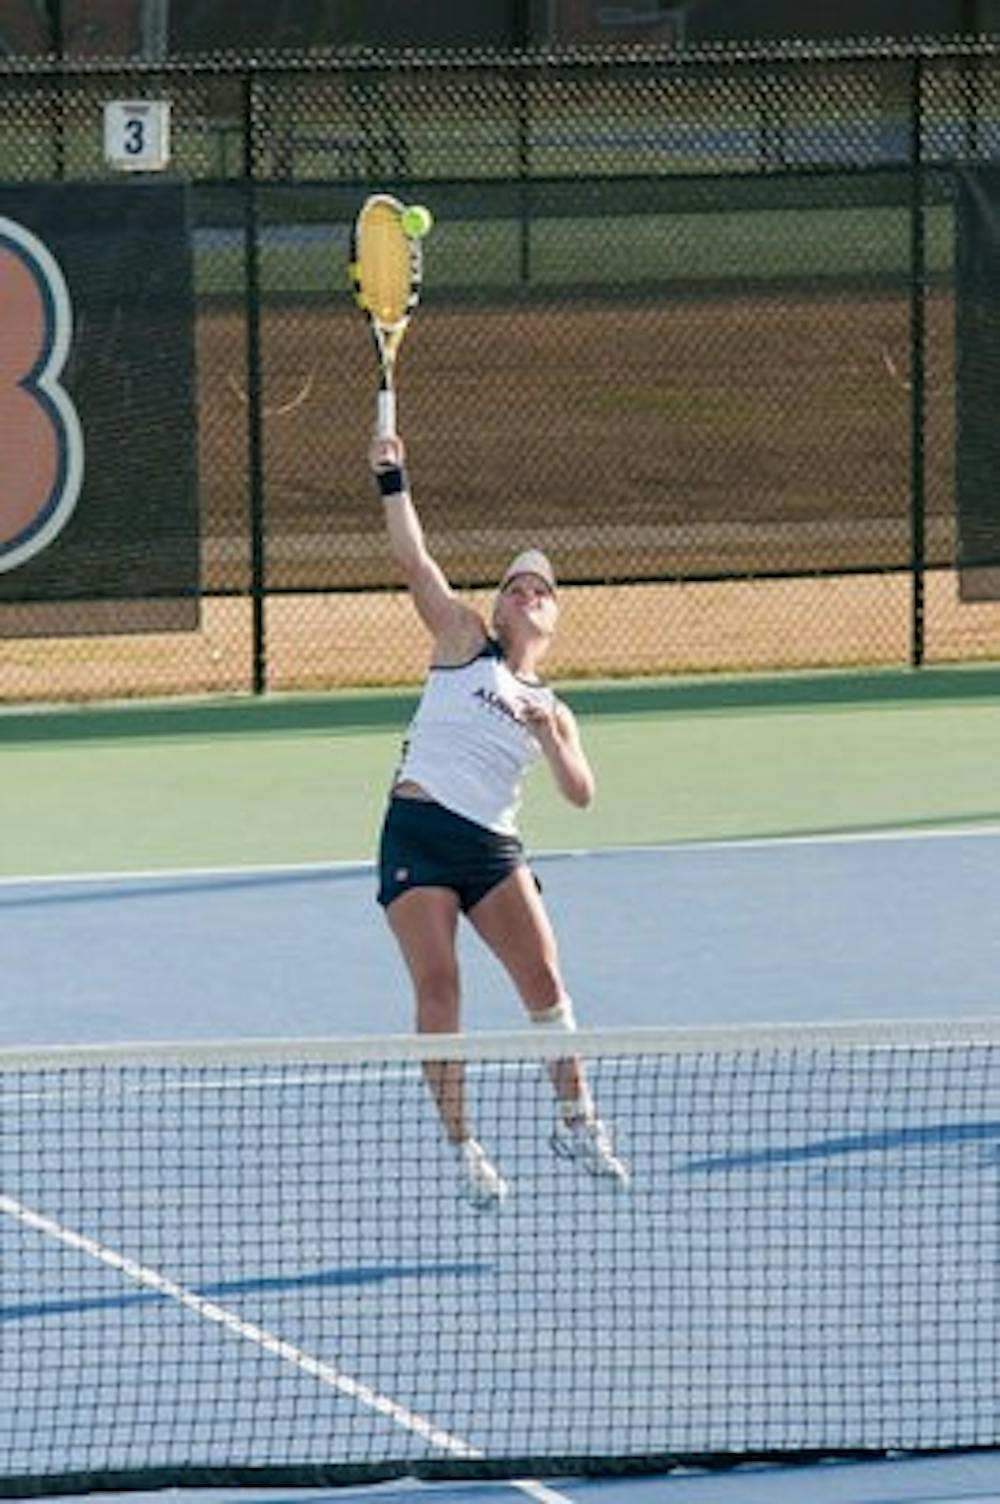 The women's tennis team defeated Boston University 4-3 and Troy University 6-1 at home March 19. This week, the Tigers prepare to host Vanderbilt Friday and travel to Lexington, Ky., Sunday to take on the Wildcats. (Philip Smith / Photo Staff)